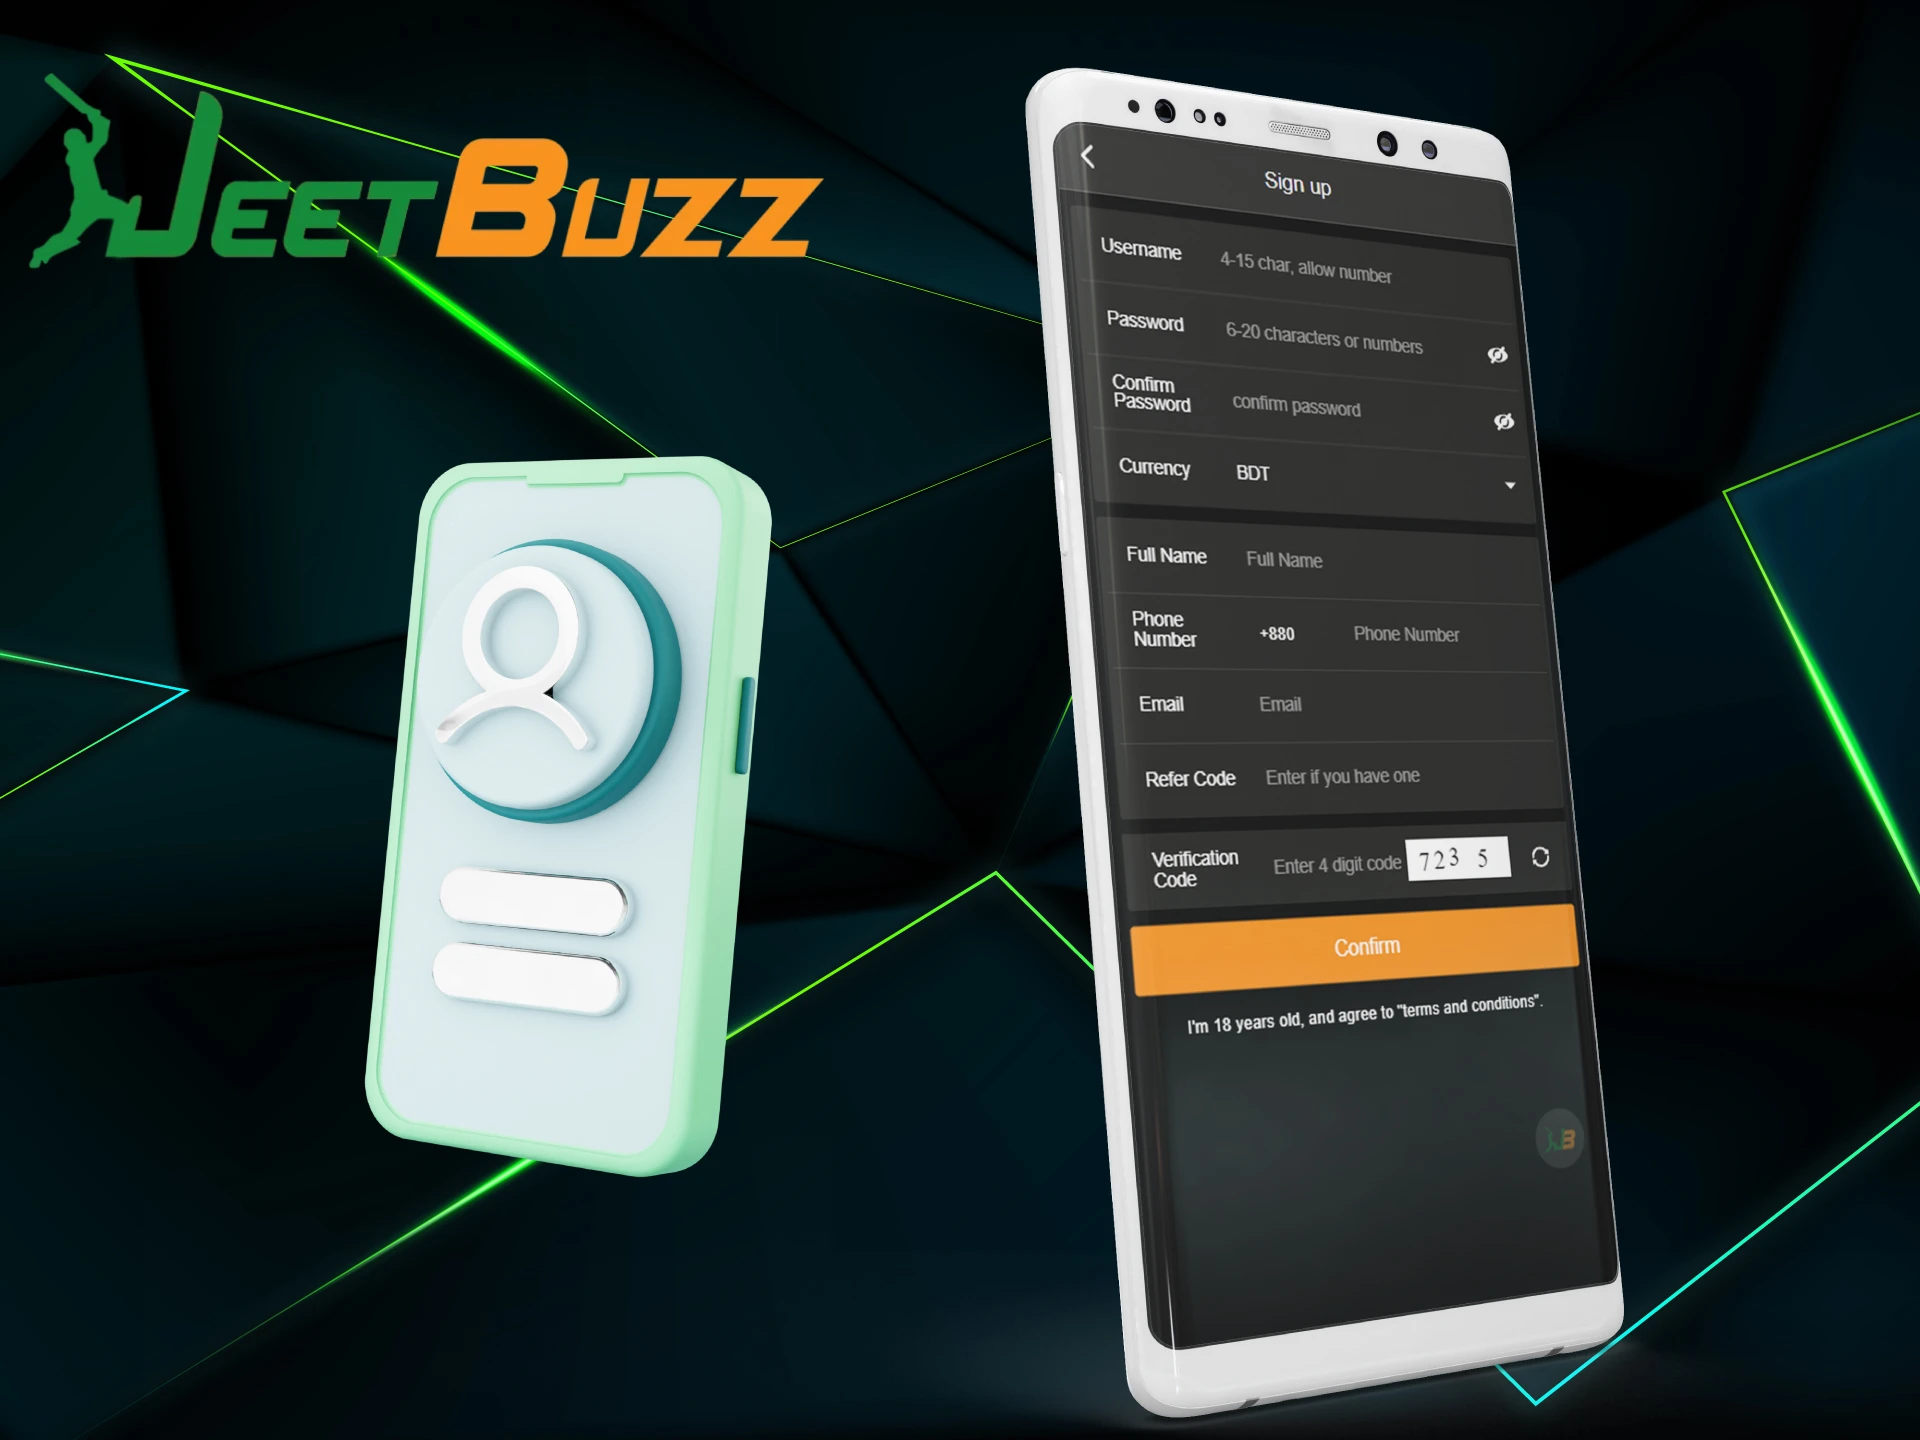 Fill out the registration form and start betting JeetBuzz through the app.